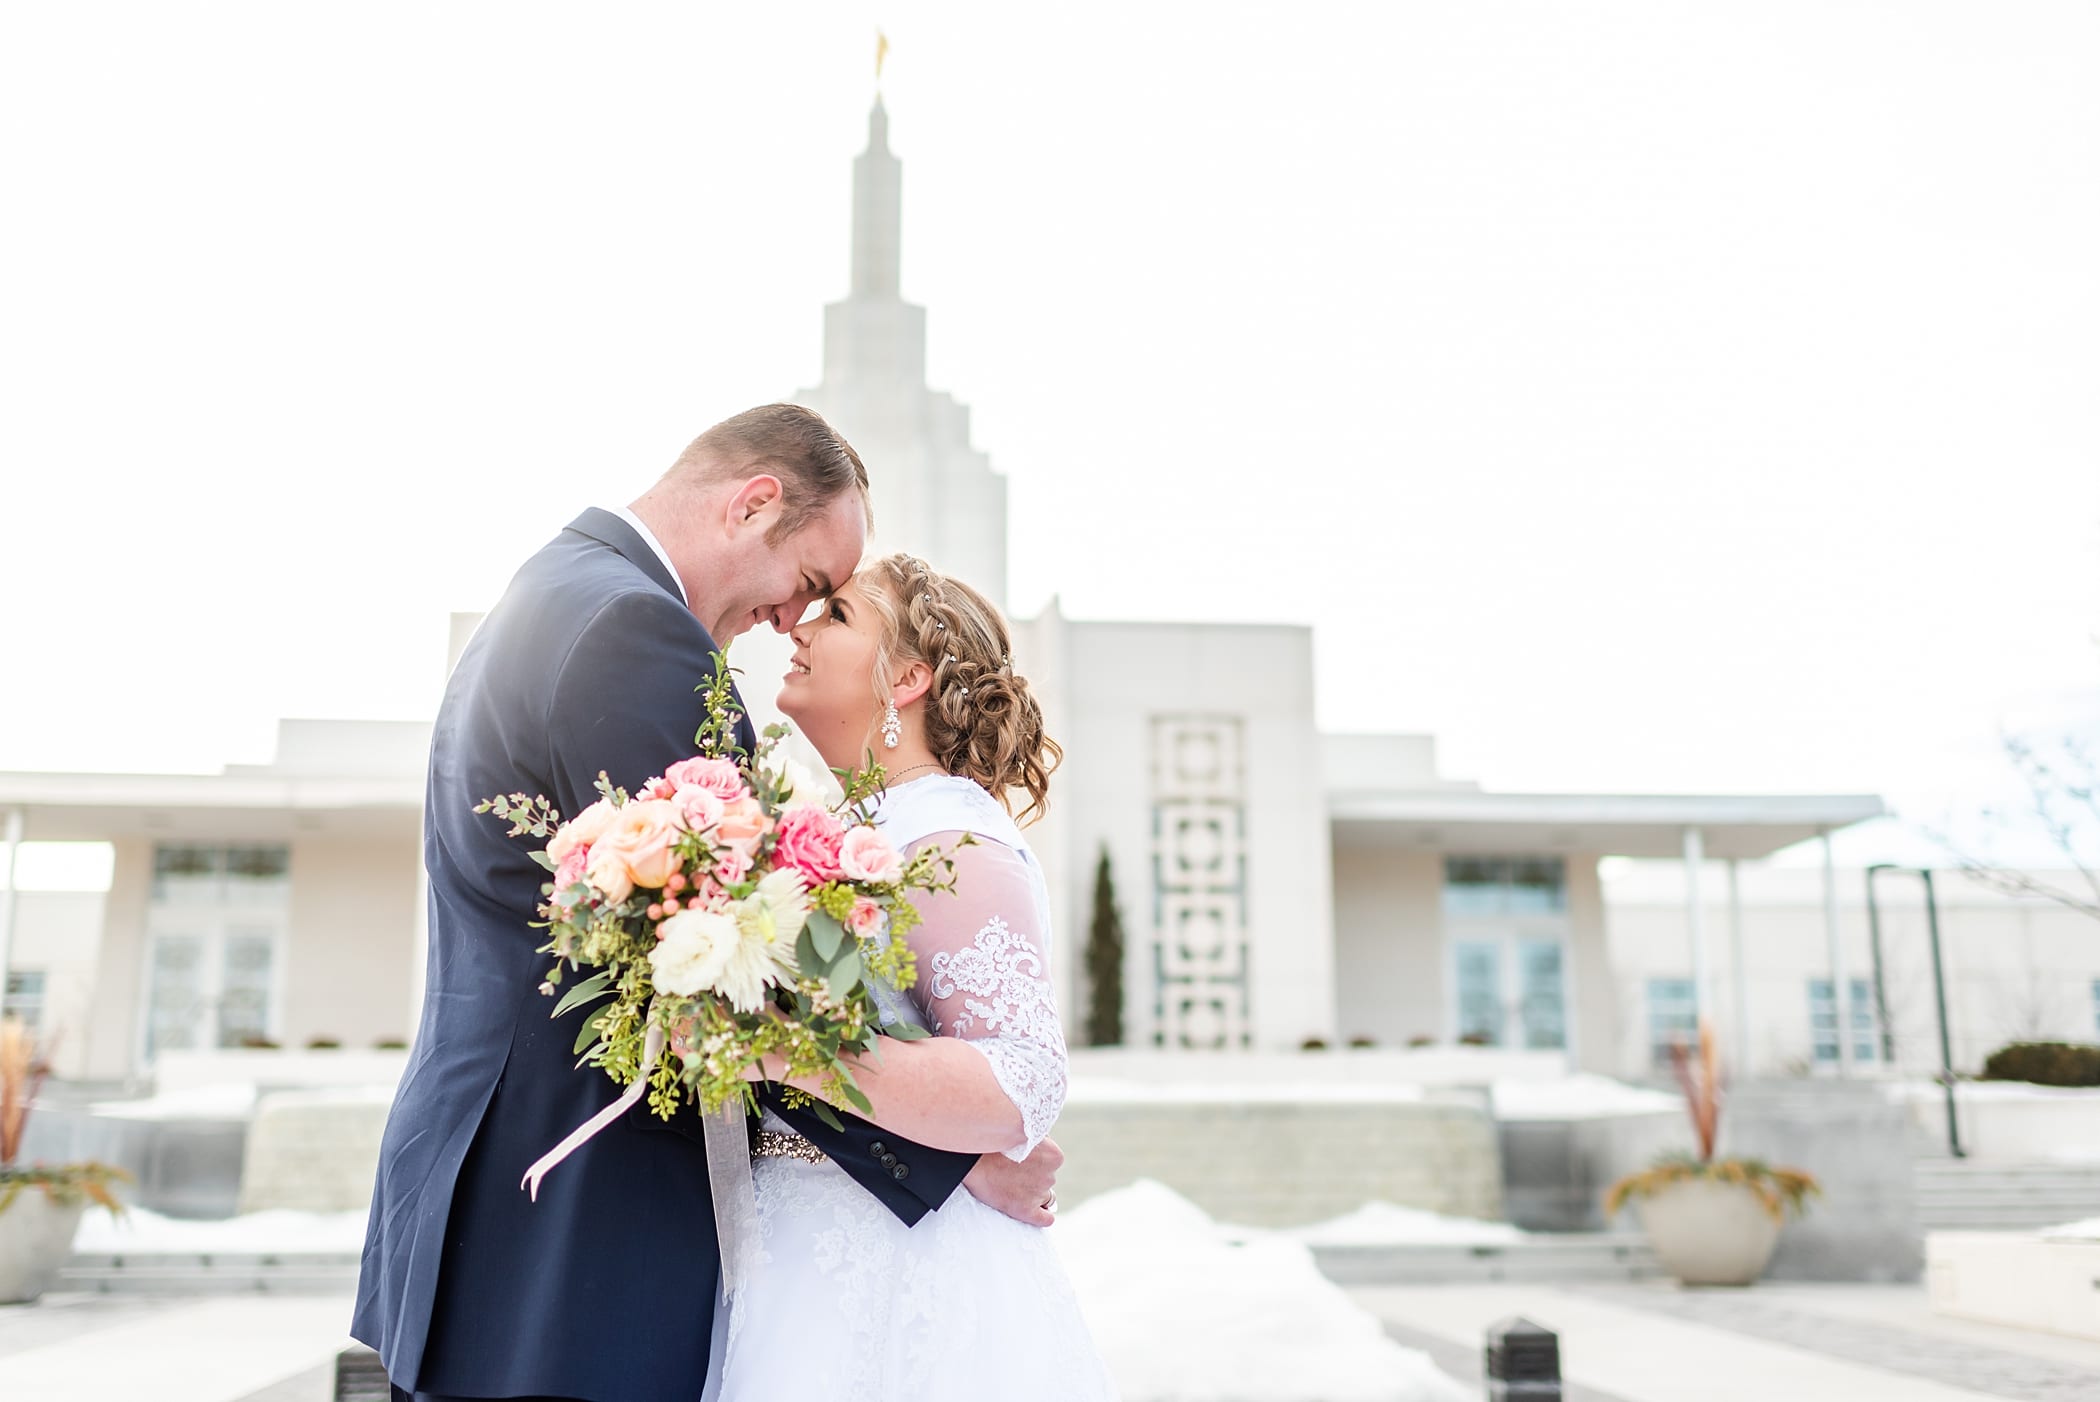 First look at the Idaho Falls Temple in Spring by Michelle & Logan